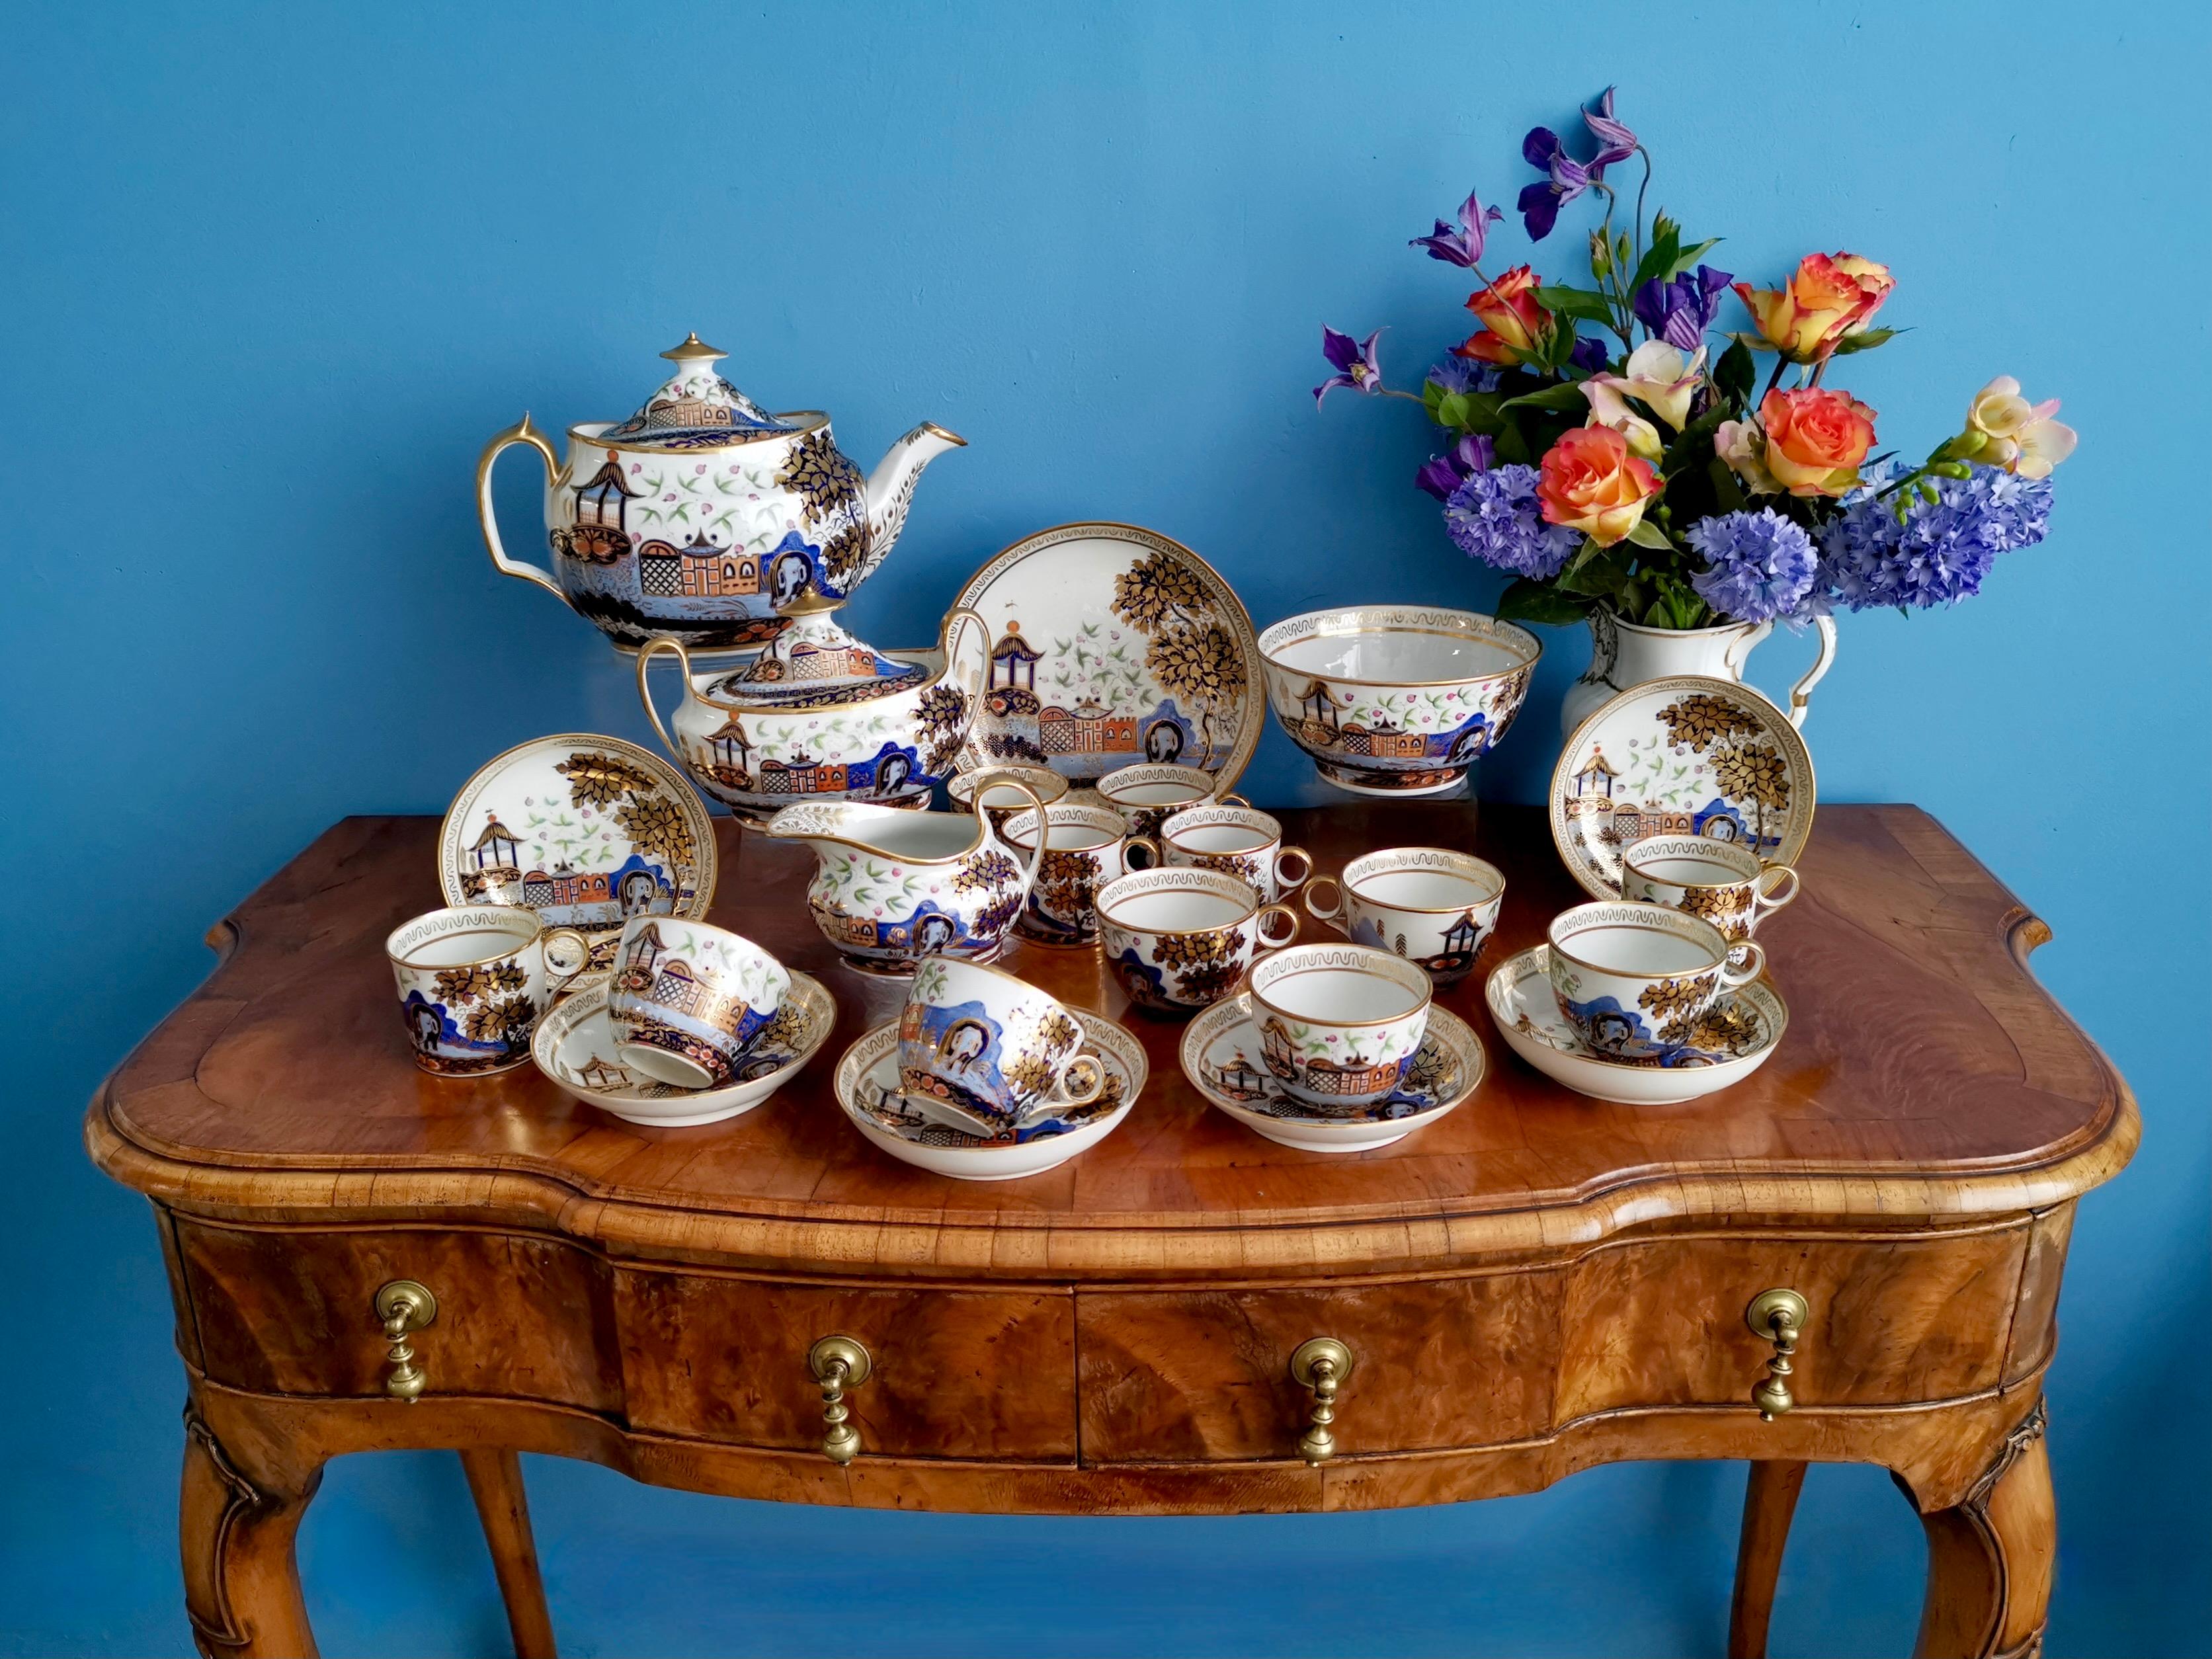 This is gorgeous teacup and saucer made by New Hall around the year 1810. The set is decorated in the super-charming and popular but very rare Elephant pattern.

We have an entire tea service for 6 available, as well as several individual tea and